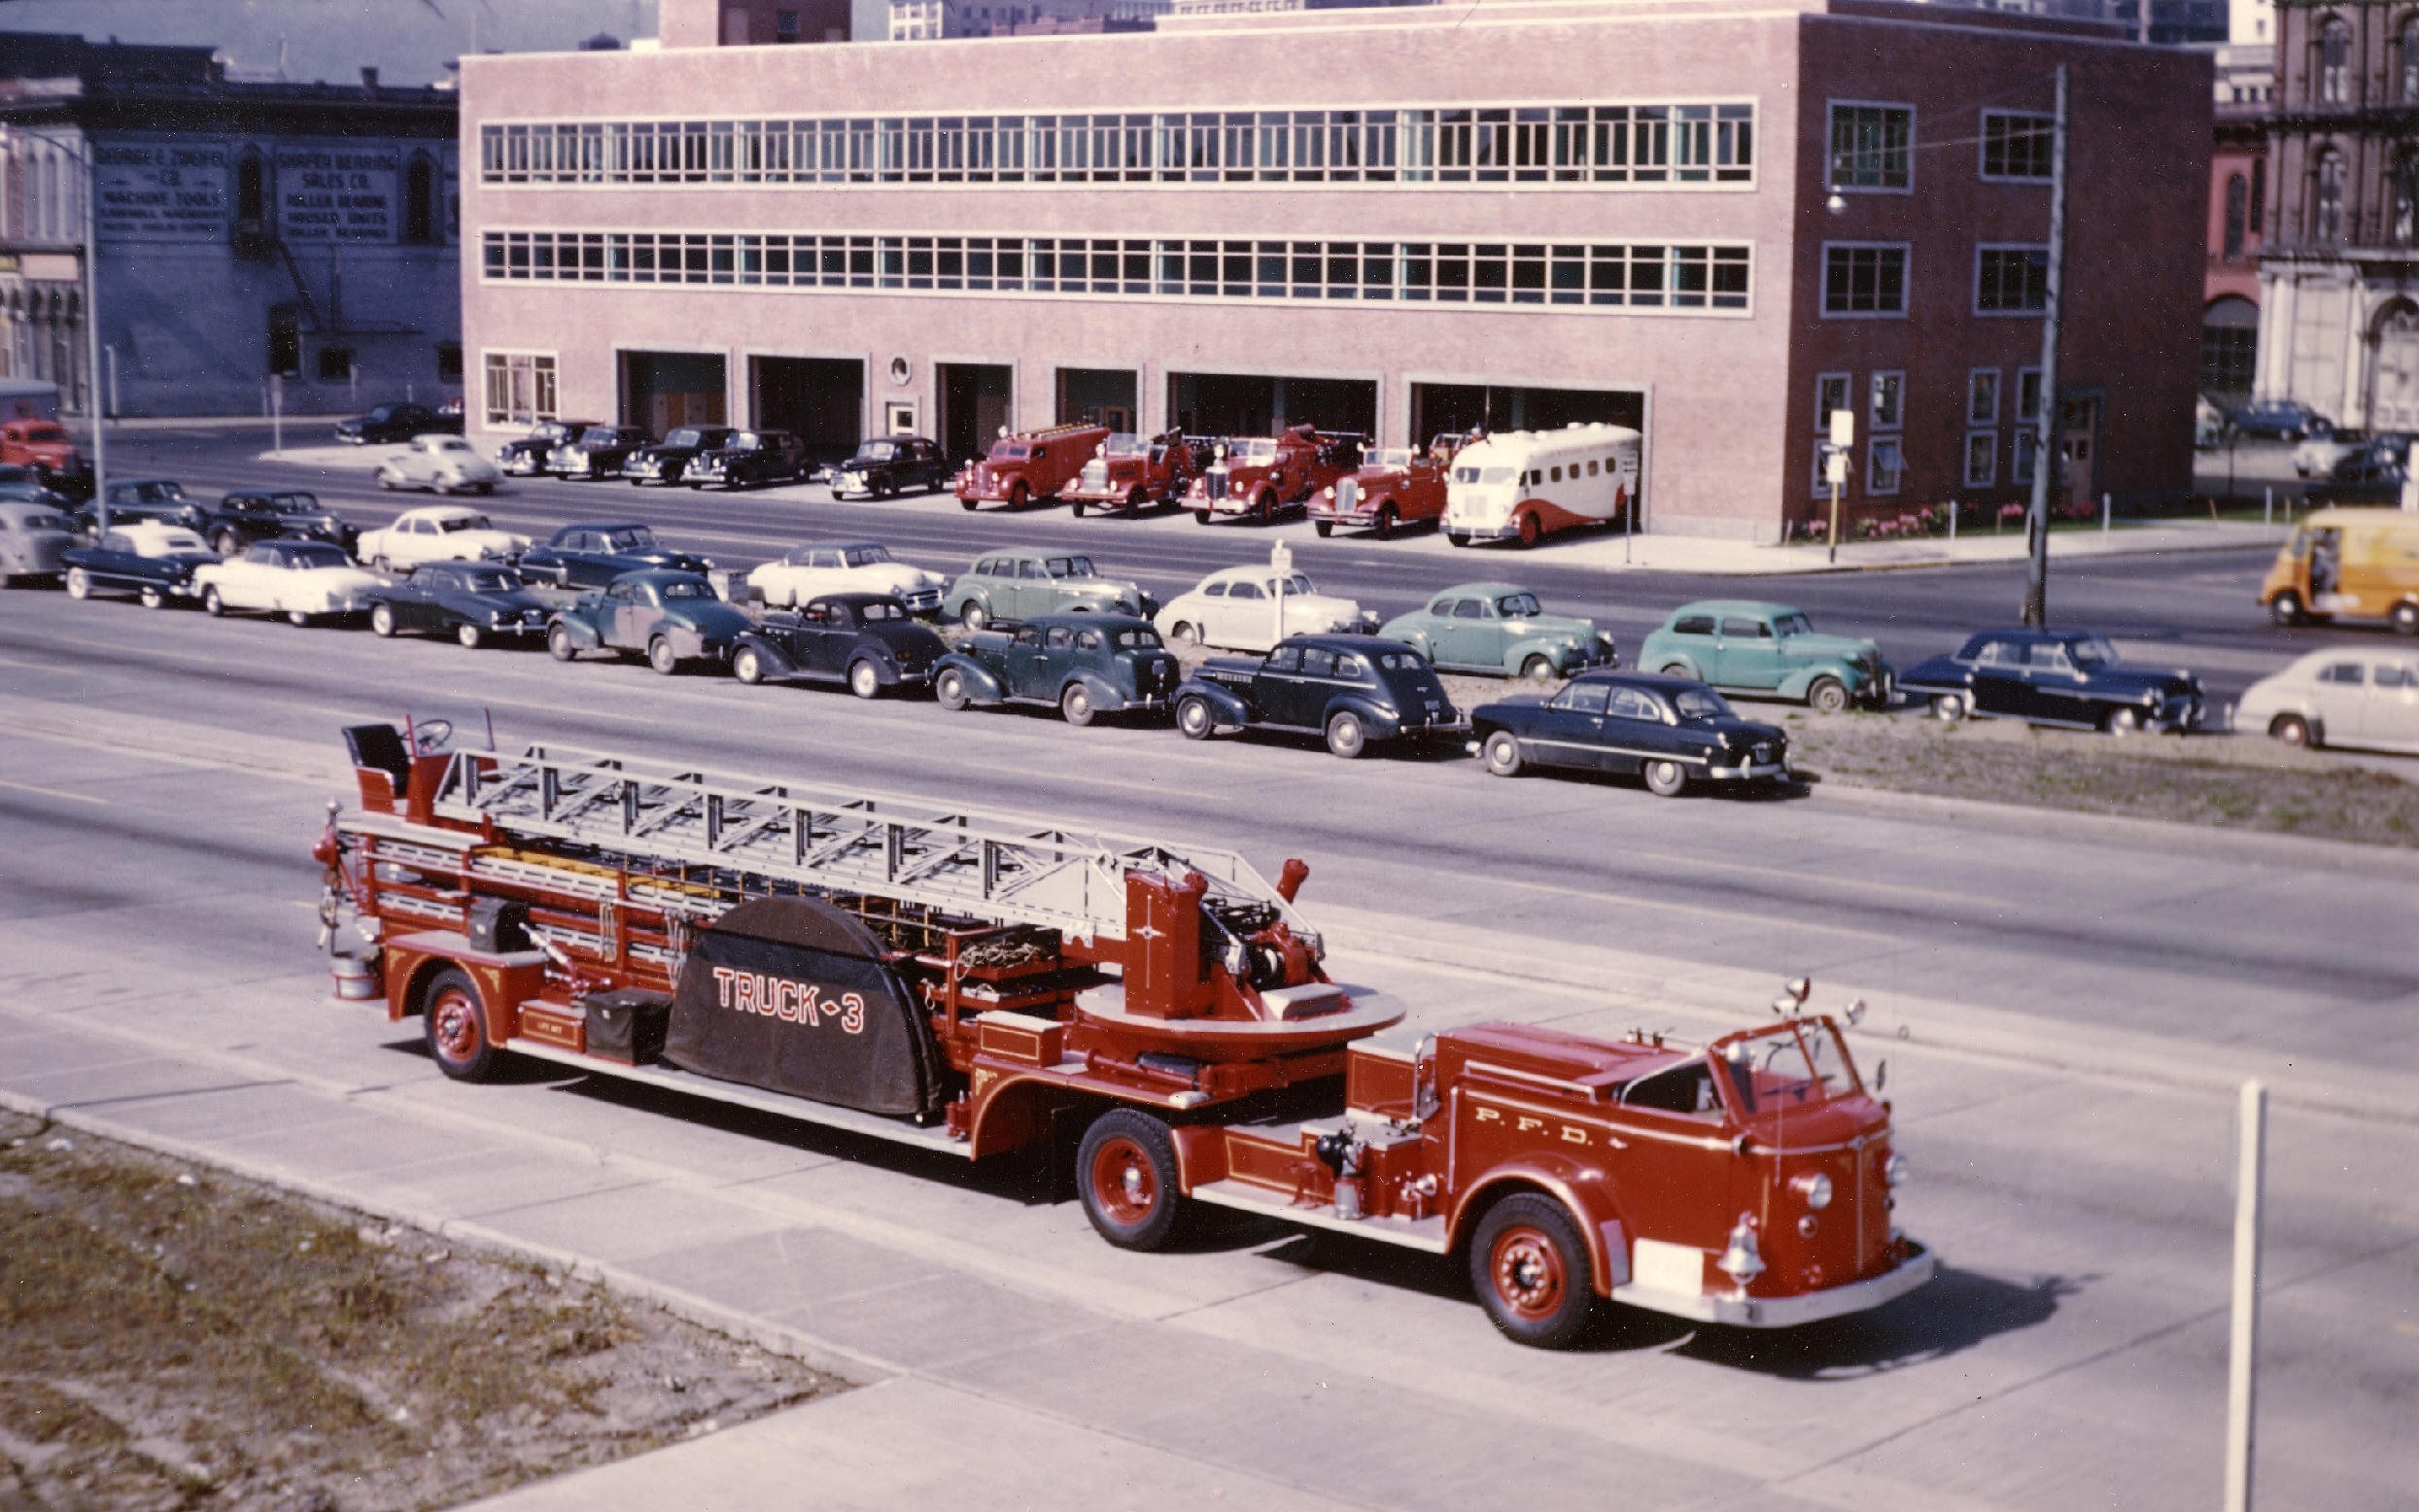 vehicles, fire truck, car, red